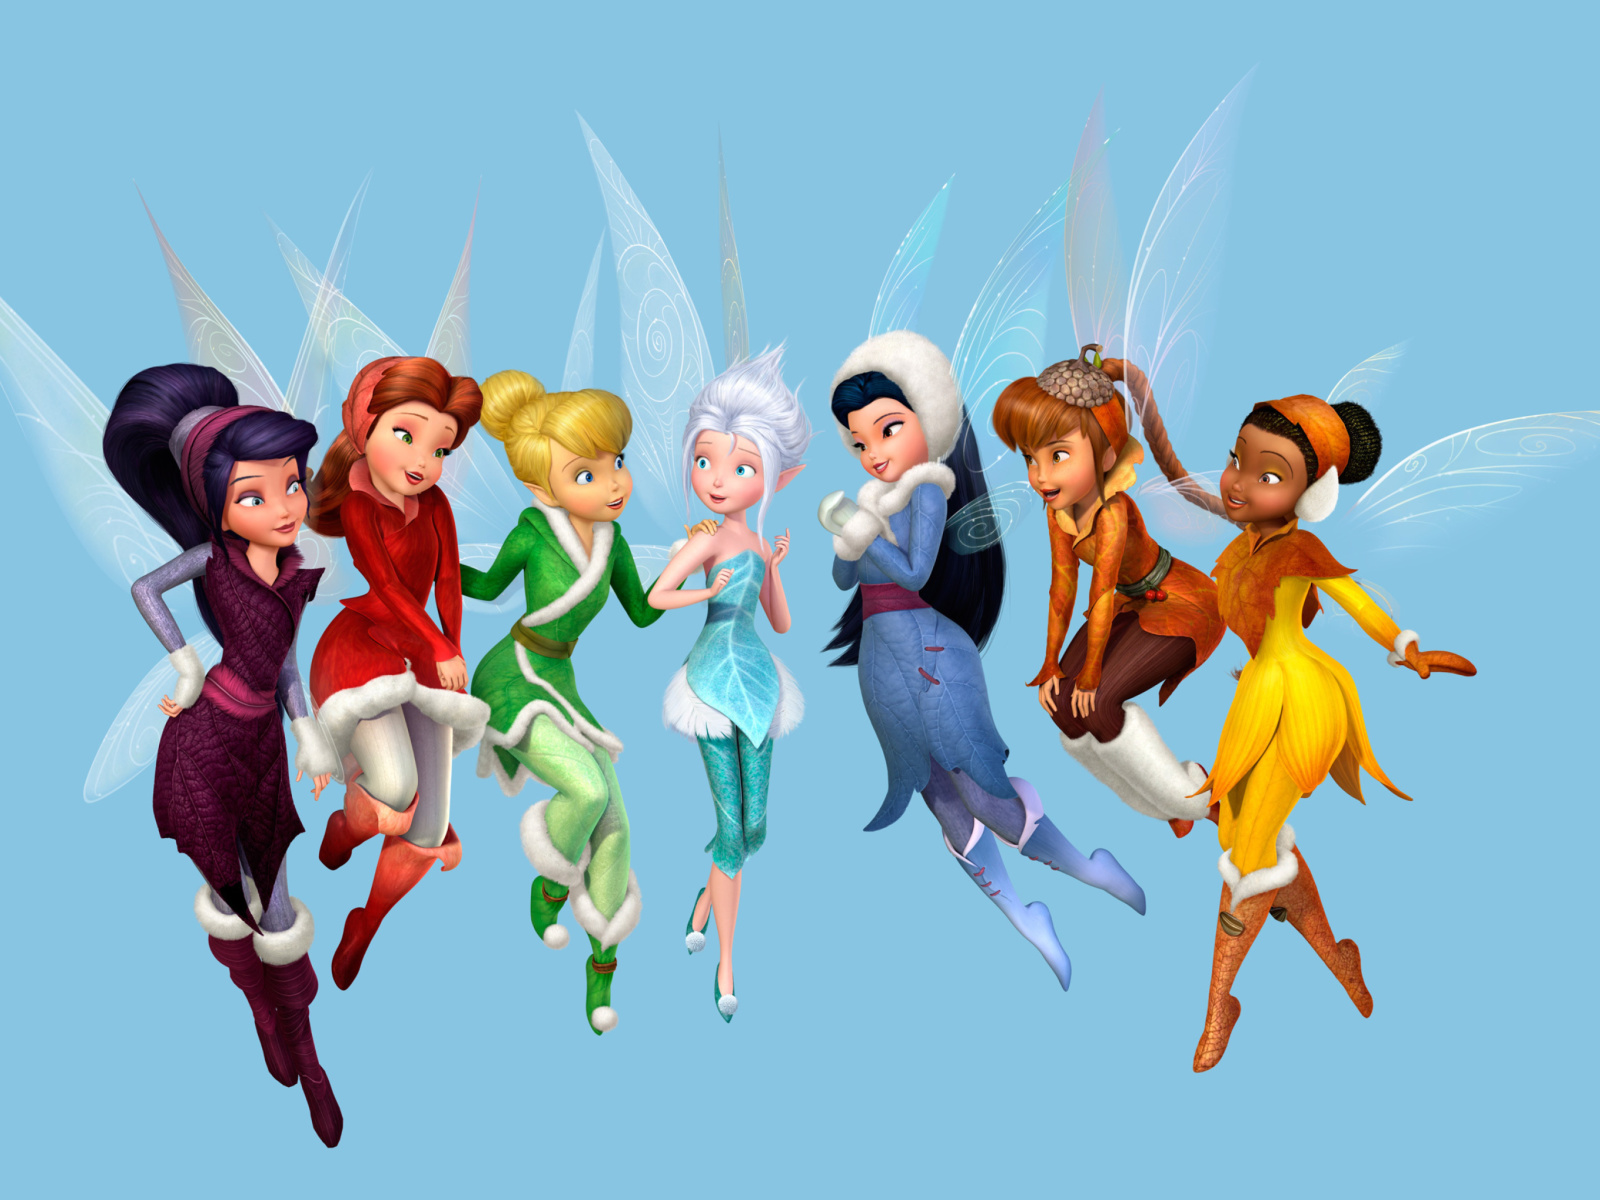 Tinkerbell and the Mysterious Winter Woods wallpaper 1600x1200